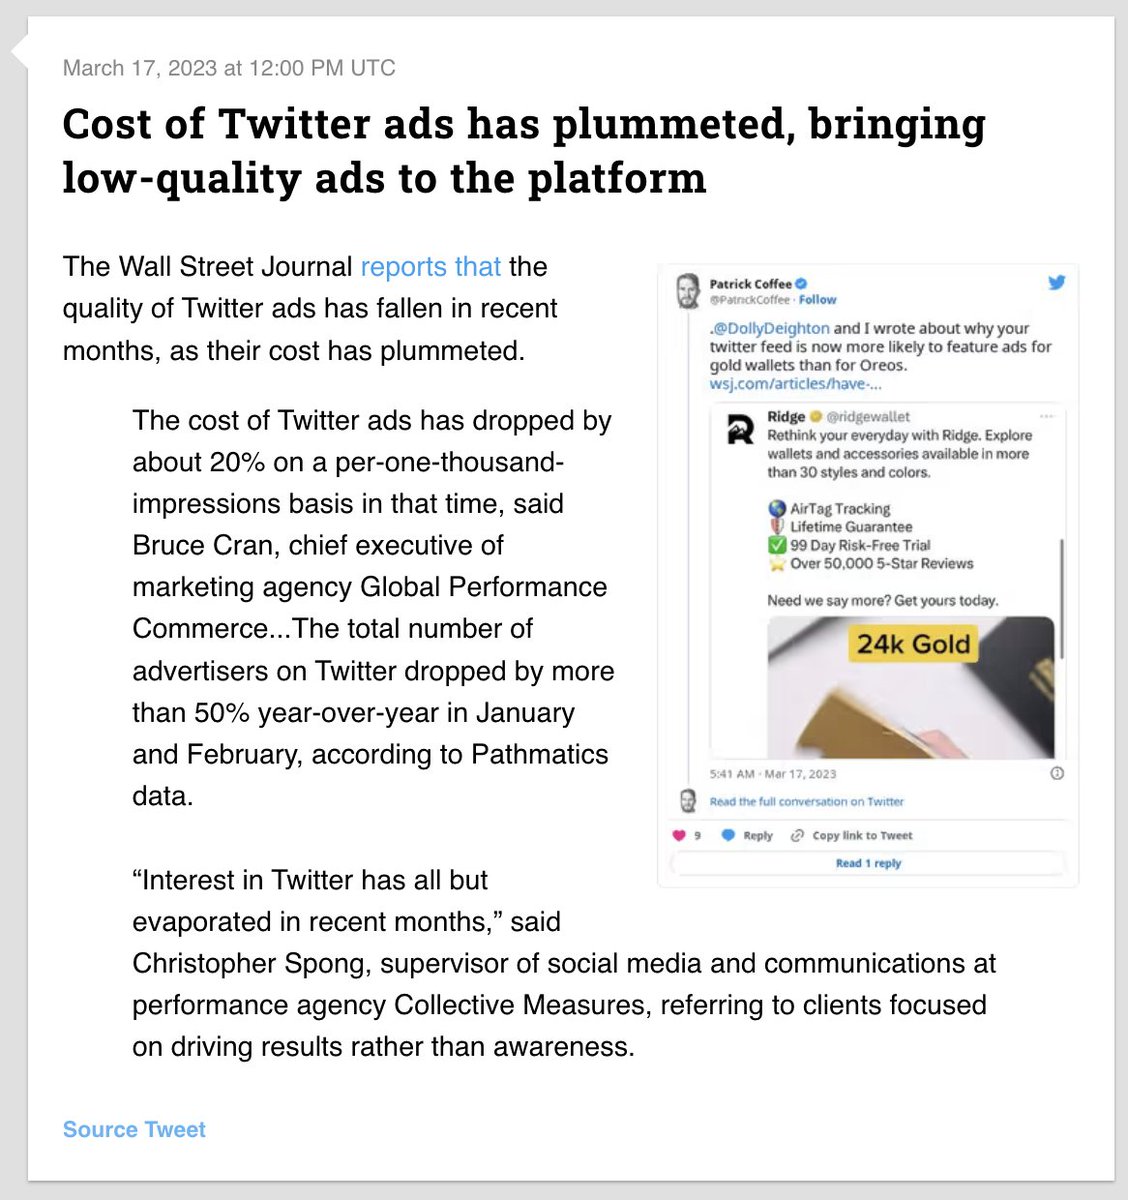 If you're wondering why all these crappy ads are appearing here, it's because they can't get anyone else to pay their ever-decreasing rates twitterisgoinggreat.com/#cost-of-twitt…